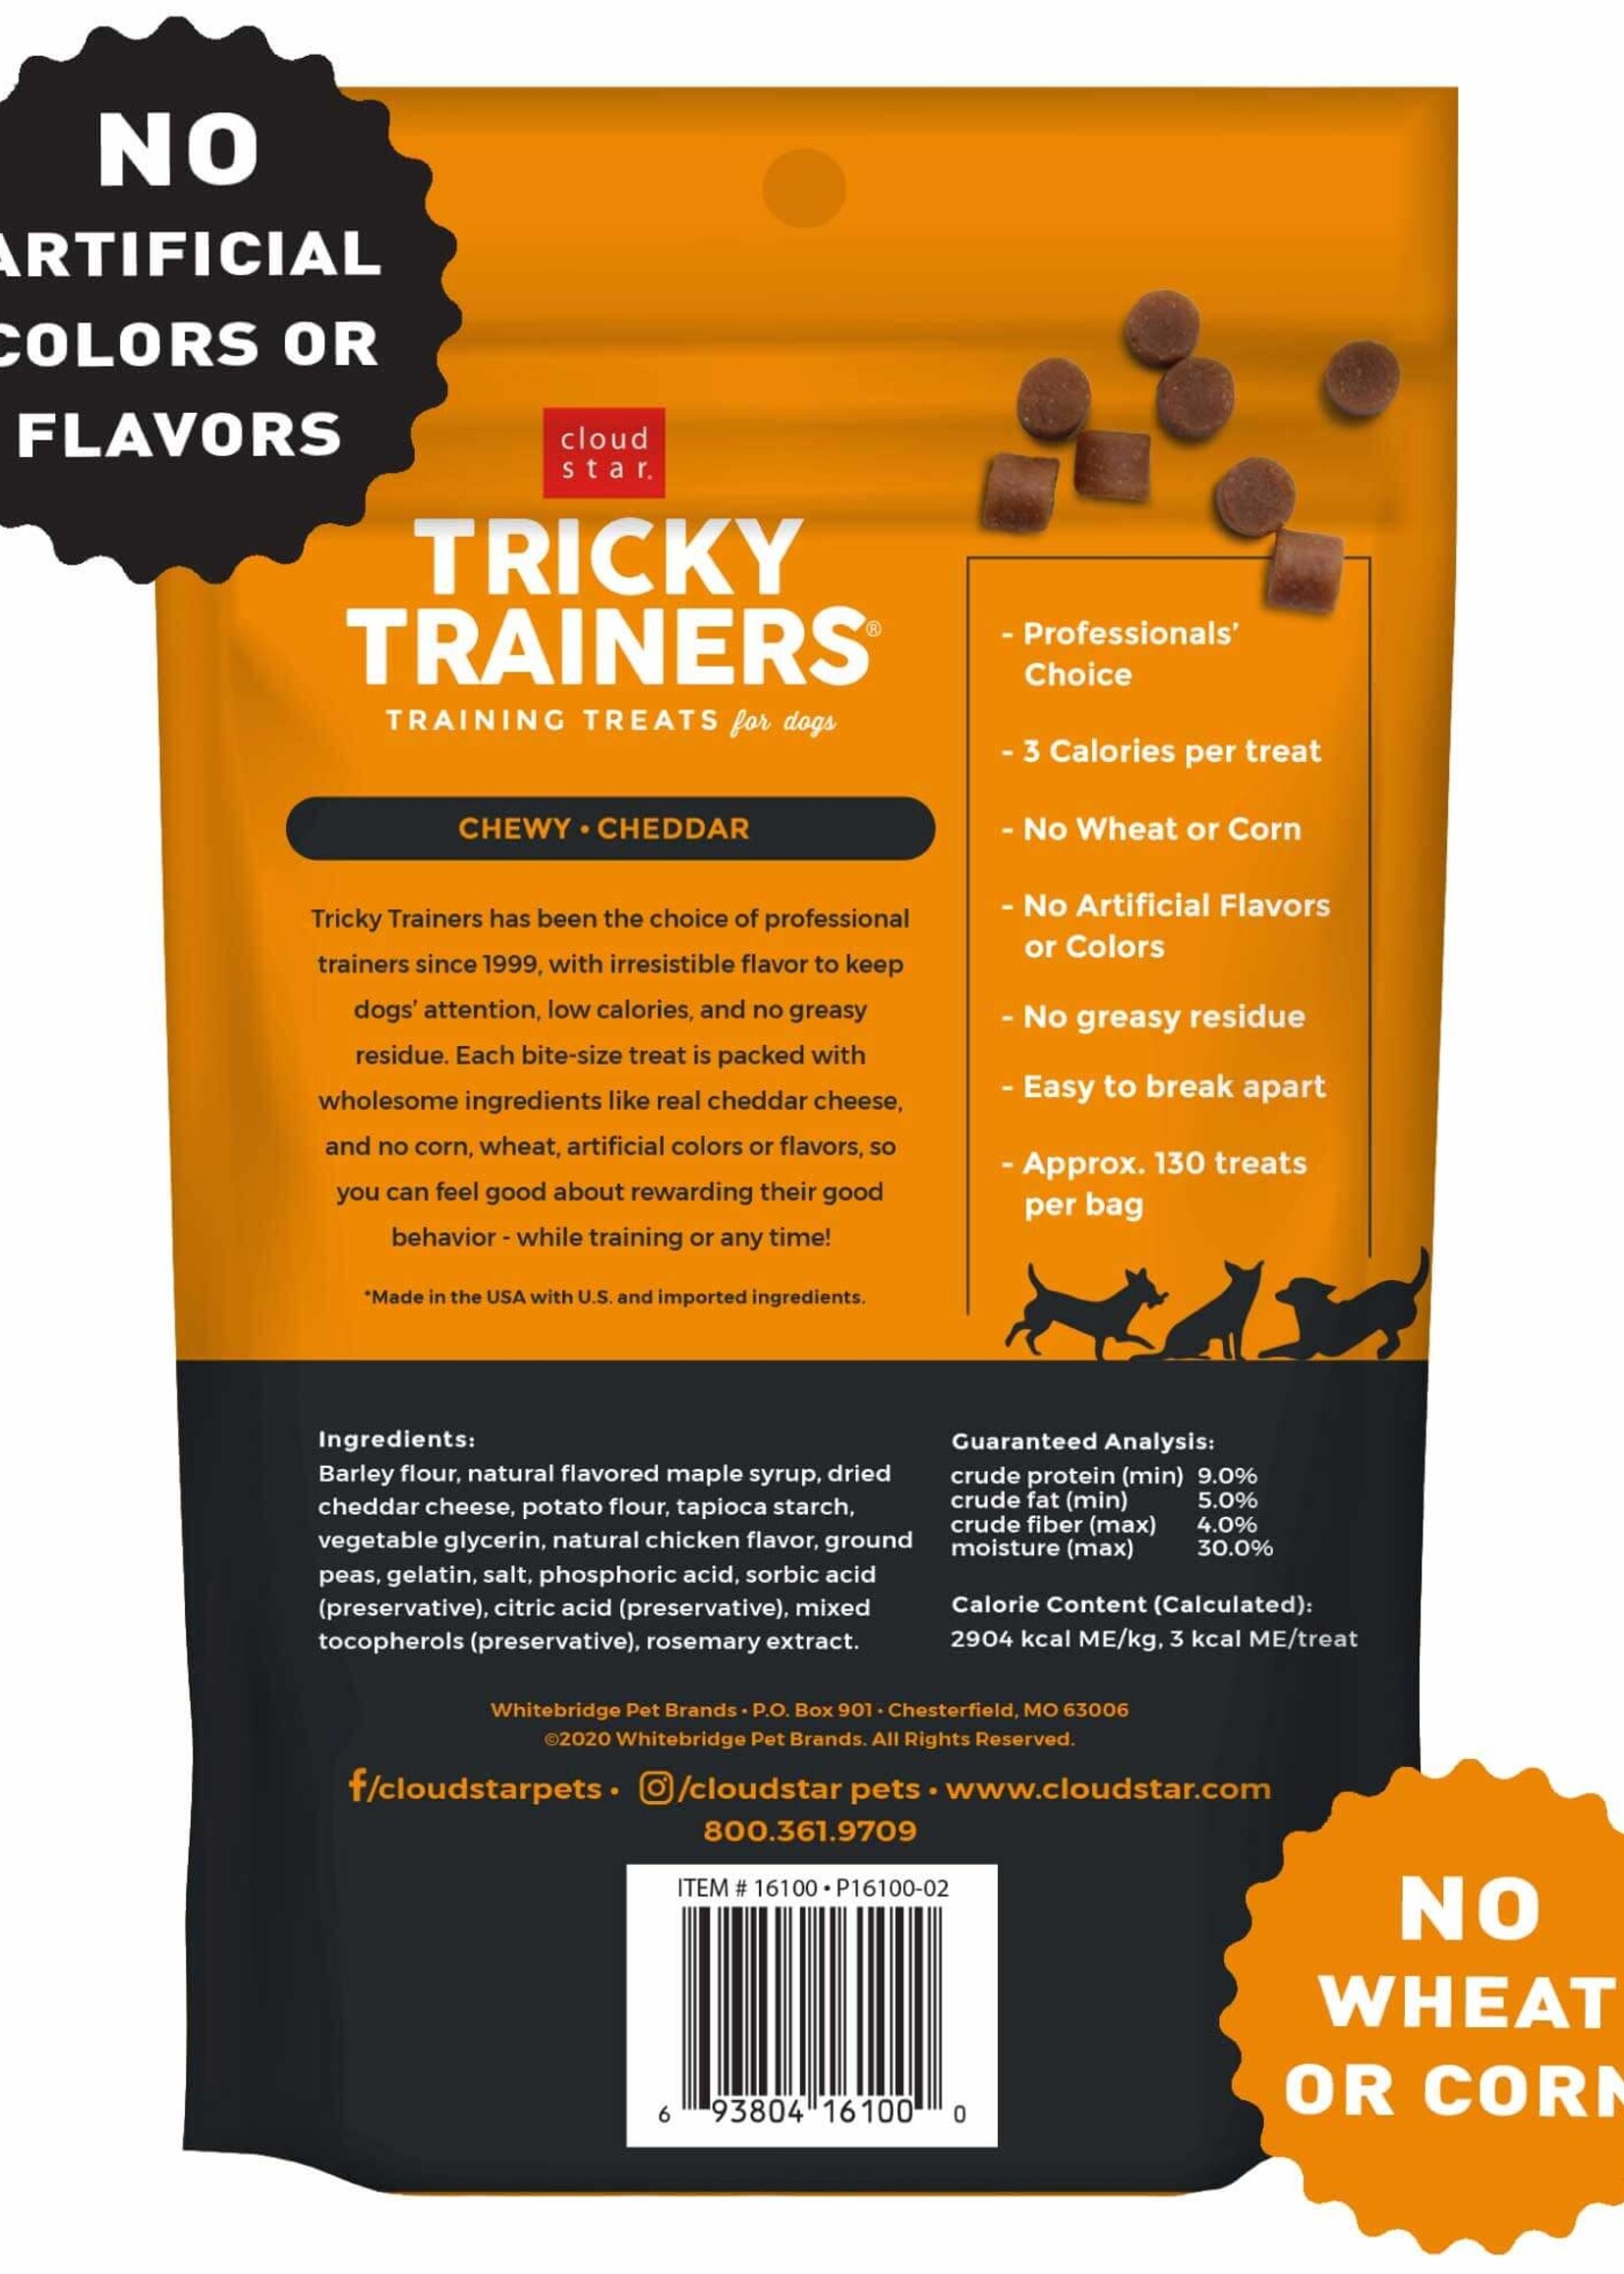 Cloud Star Cloud Star Tricky Trainers Soft & Chewy with Cheddar Training Dog Treats 5-oz